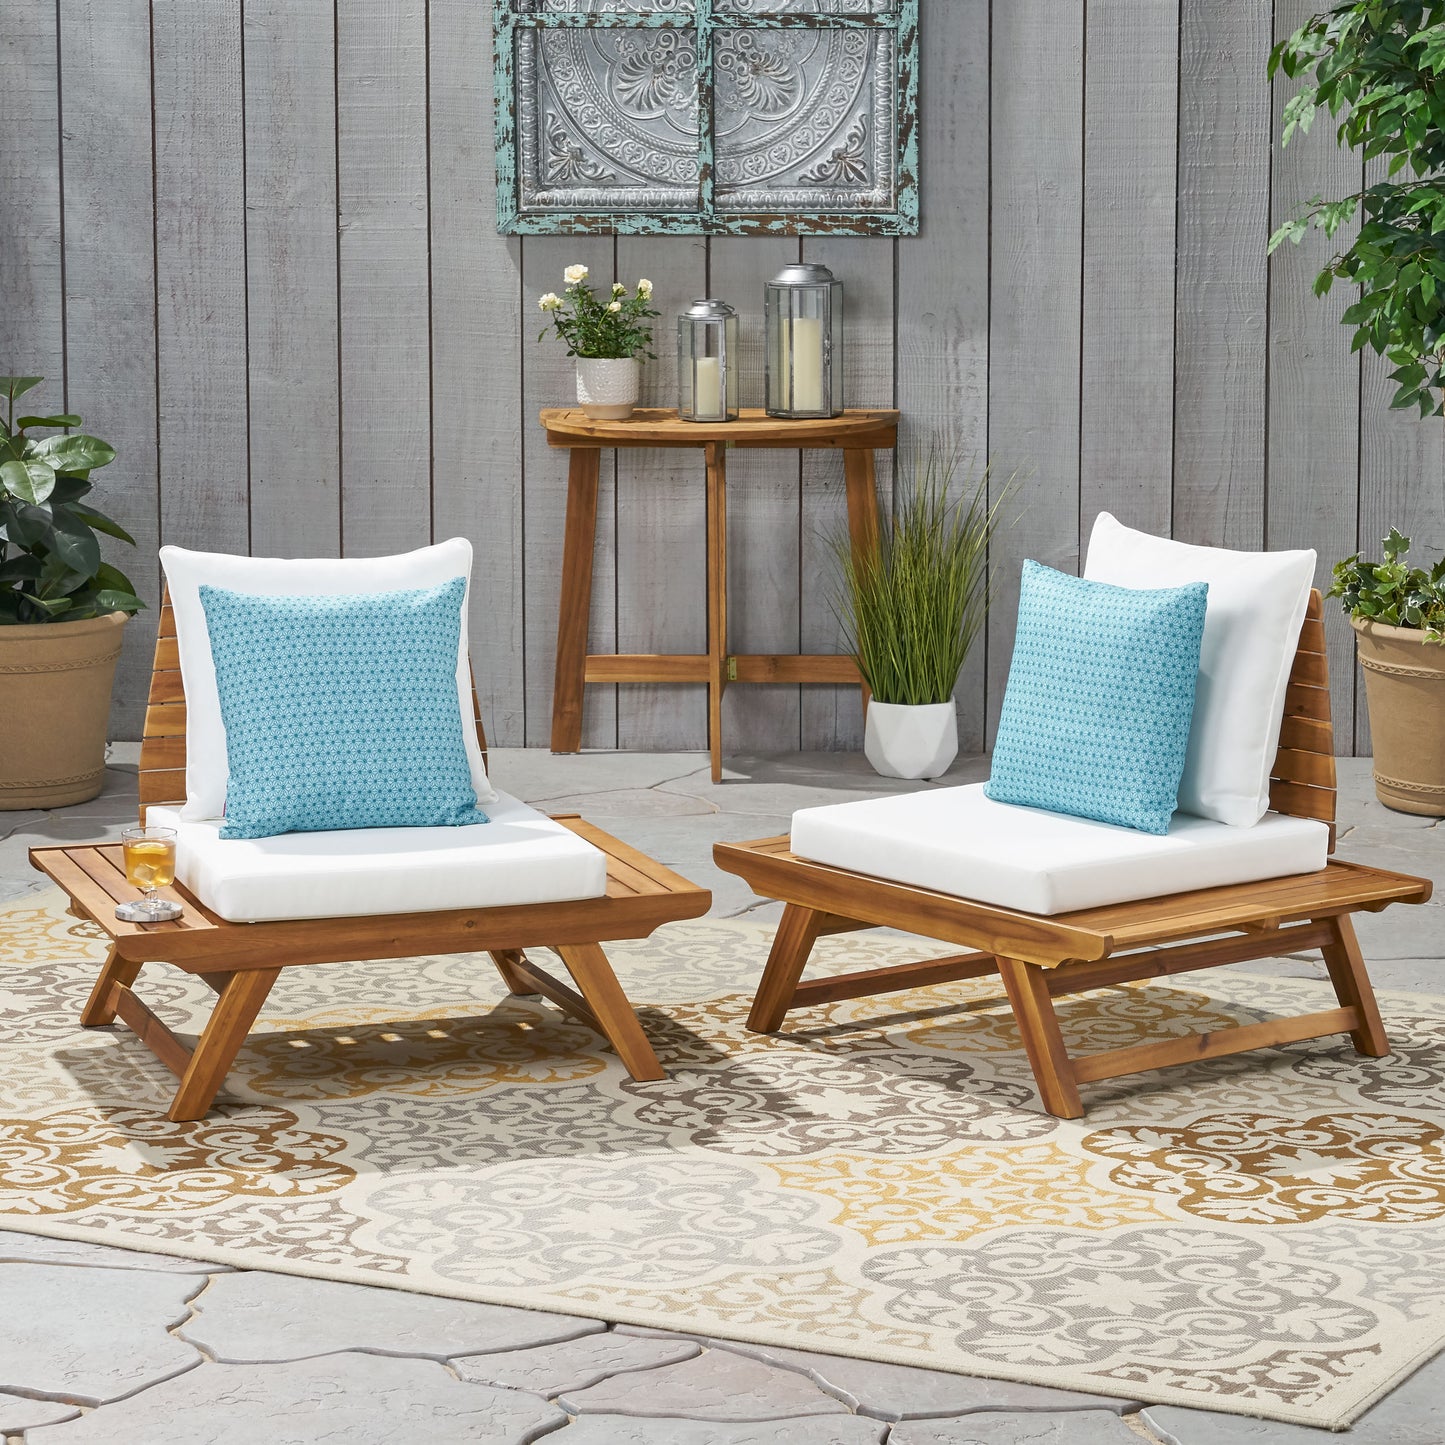 Kailee Outdoor Wooden Club Chairs with Cushions (Set of 2), Dark Gray and Gray Finish